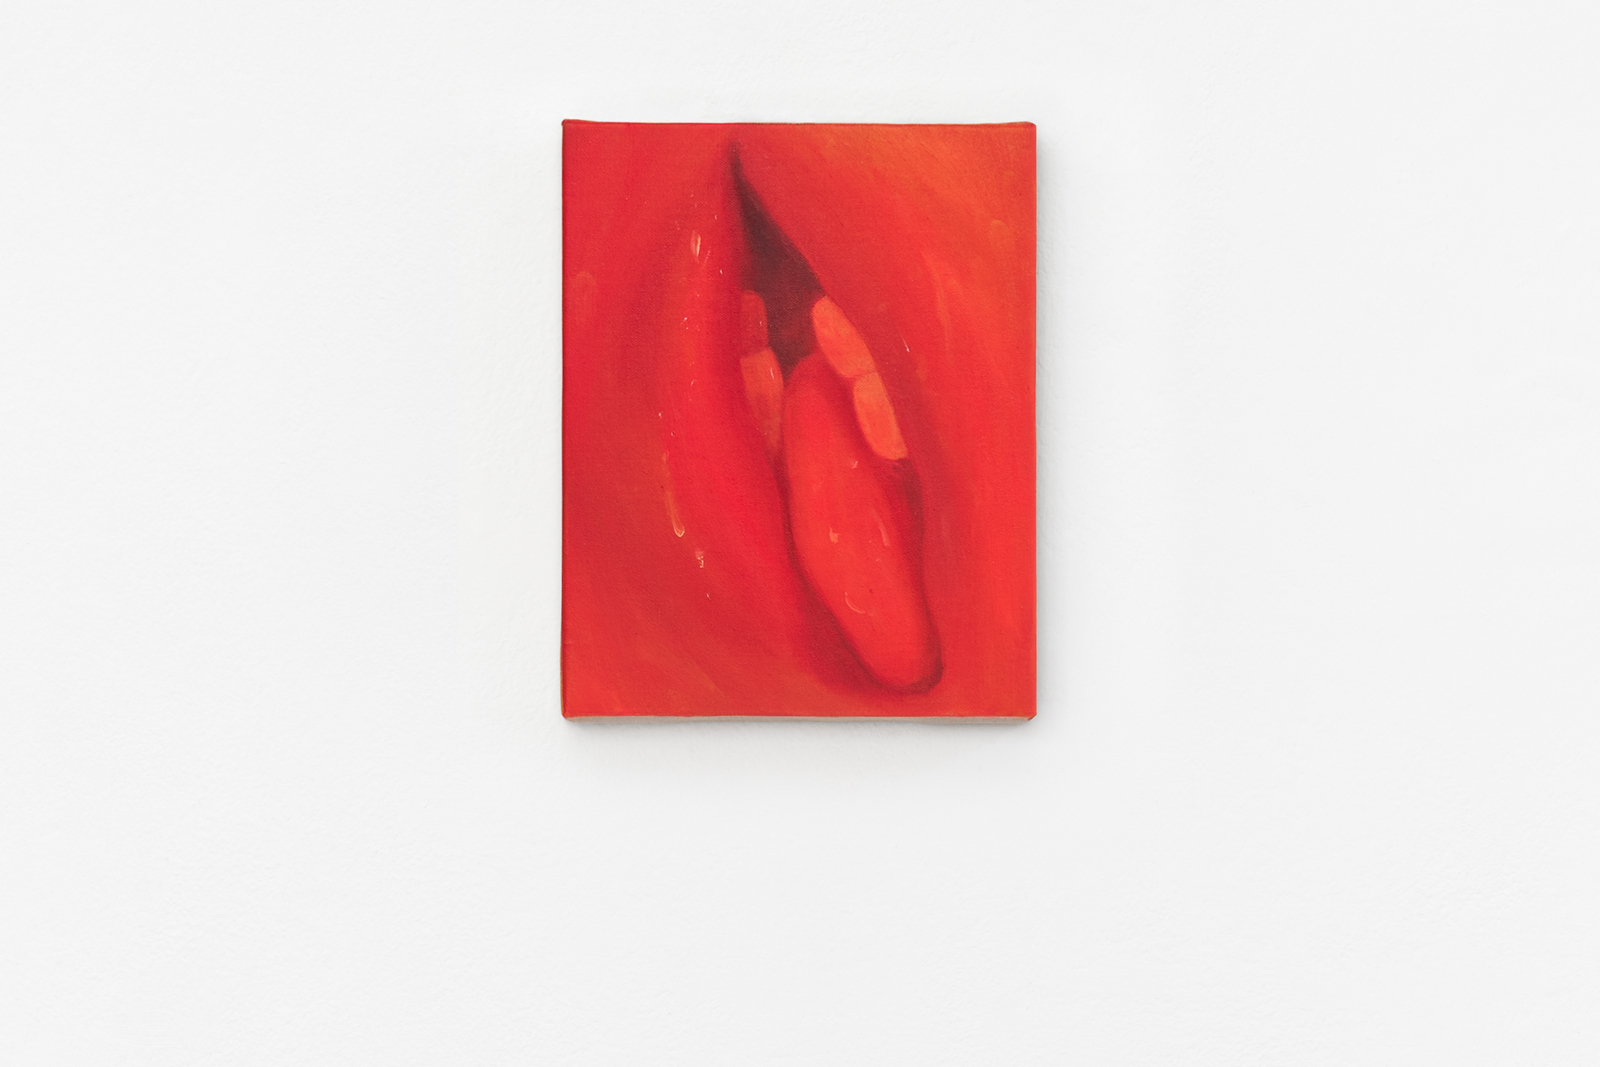 Tao Siqi, Writhing Tongue, 2022 Oil on canvas, 40 x 30 cm